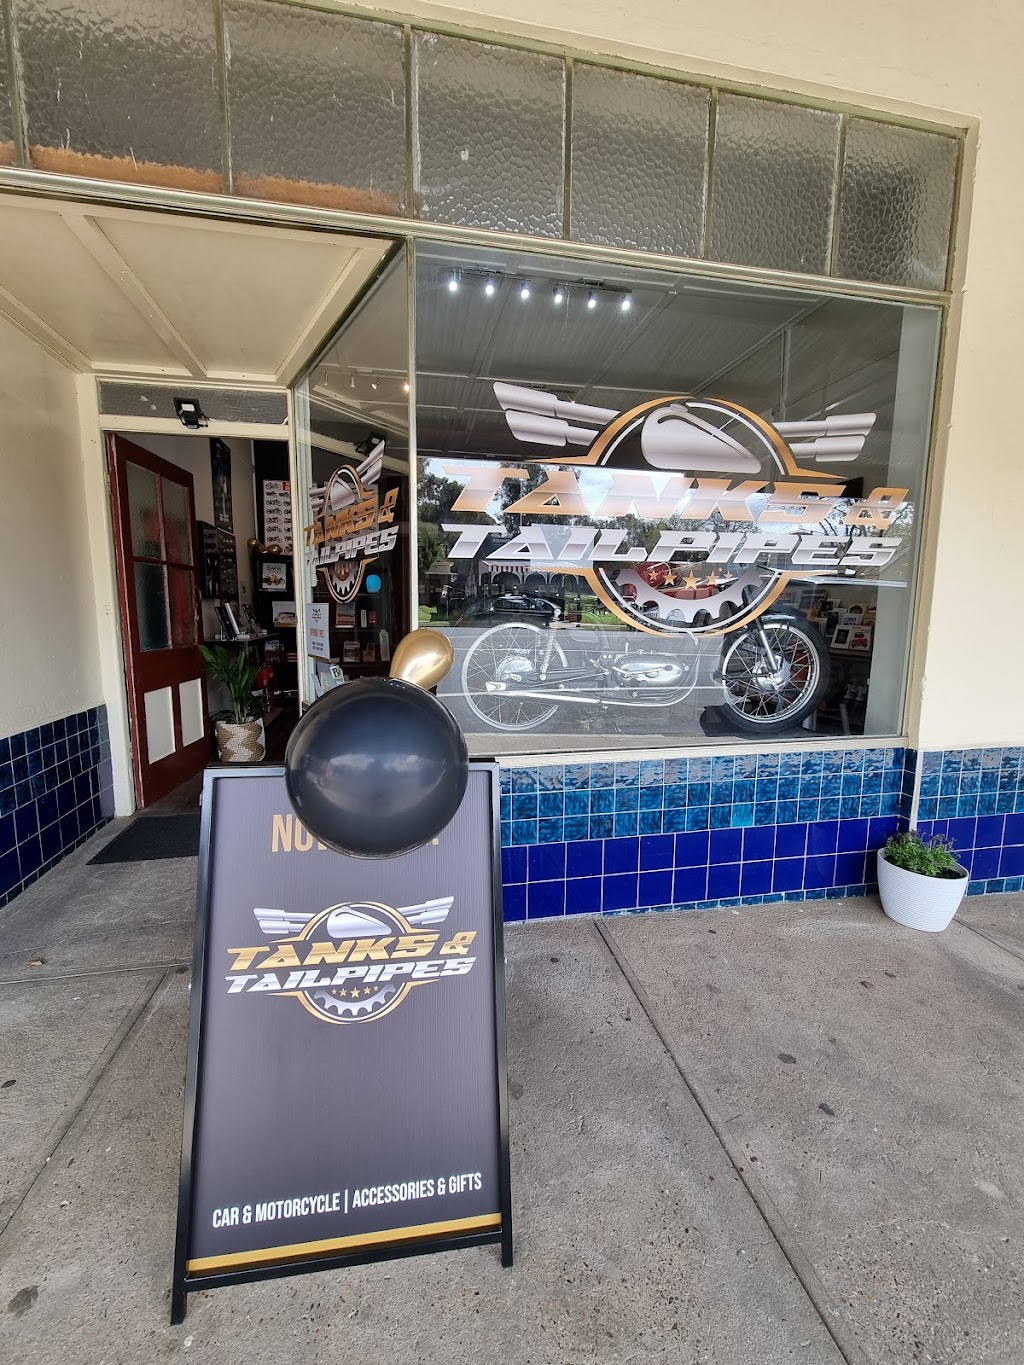 Tanks & Tailpipes | store | 61 Louee St, Rylstone NSW 2849, Australia | 0493232124 OR +61 493 232 124